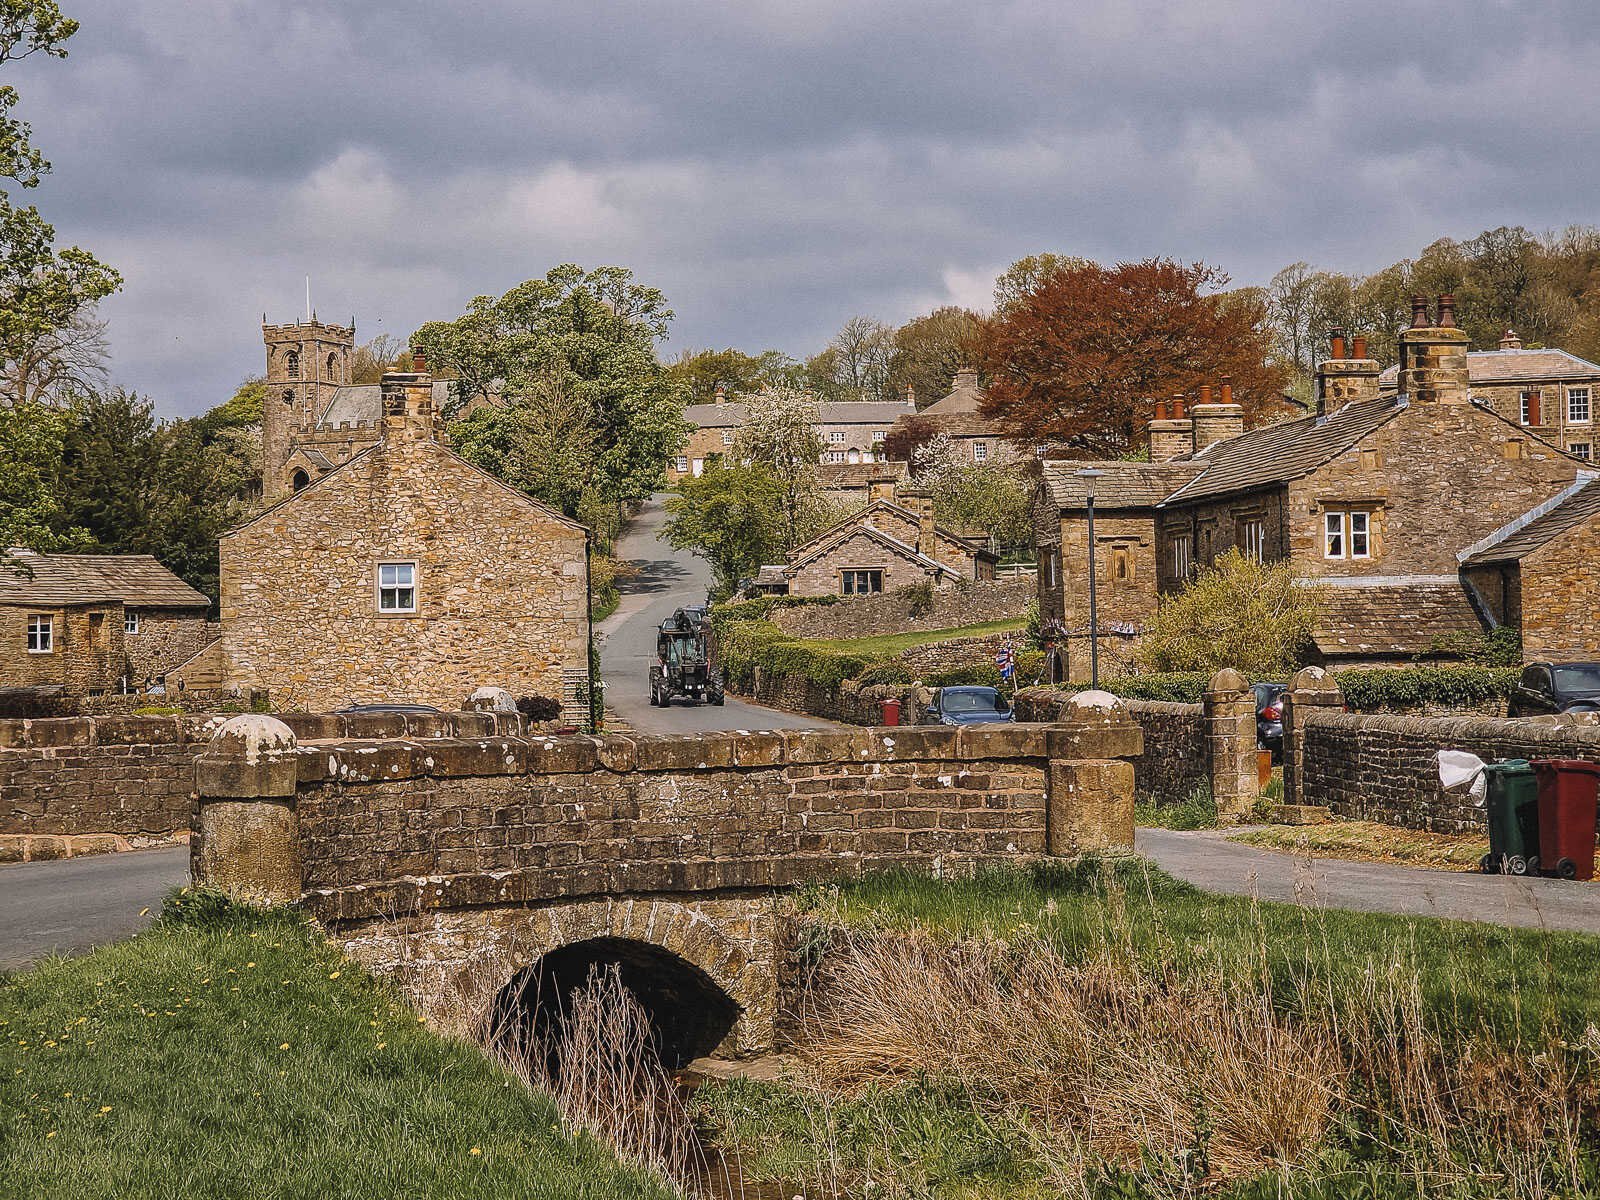 a charming village with sandstone coloured cottages and a small bridge crossing a stream. A tractor approaching down the hill in the distance